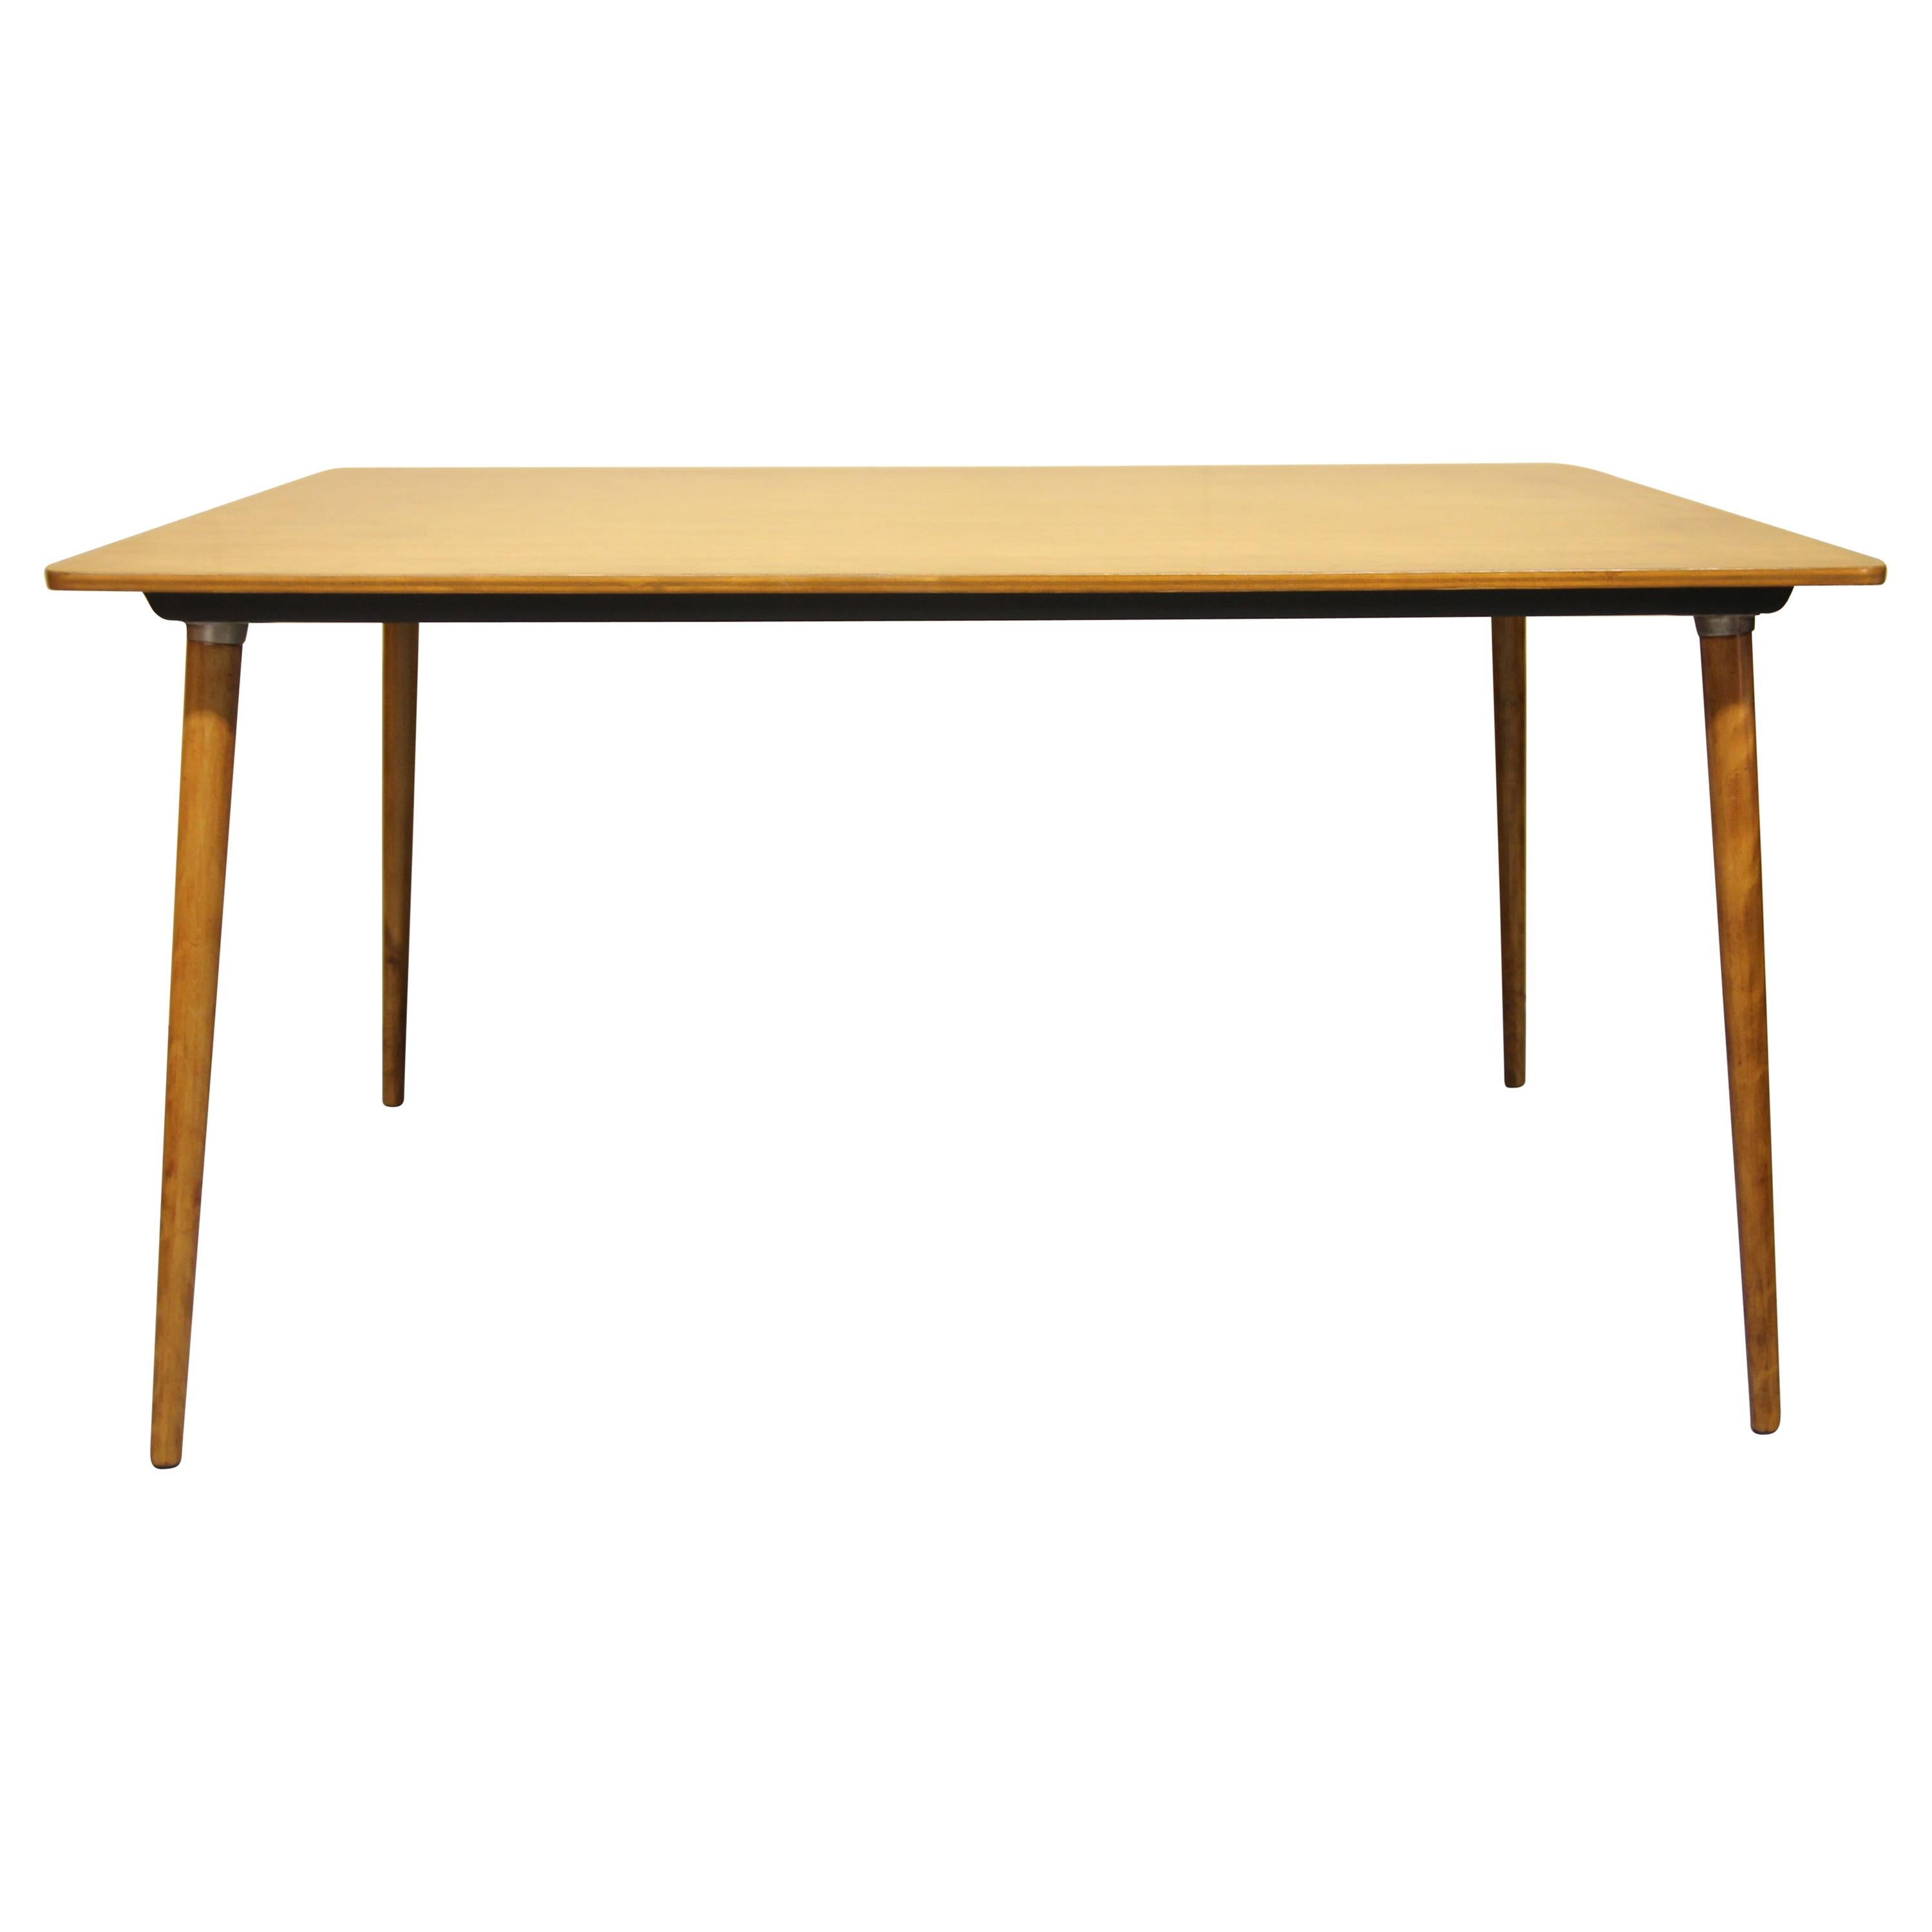 Eames DTW-3 Dining Table